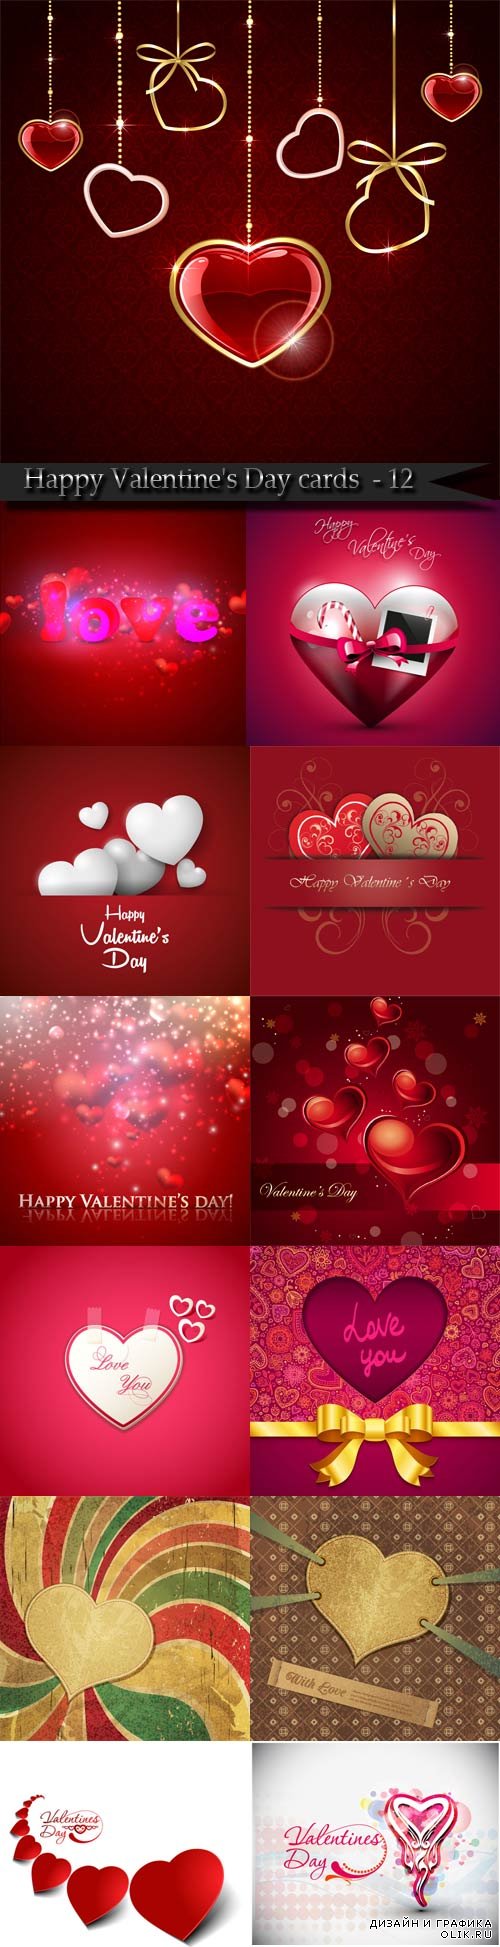 Happy Valentine's Day cards and backgrounds - 12